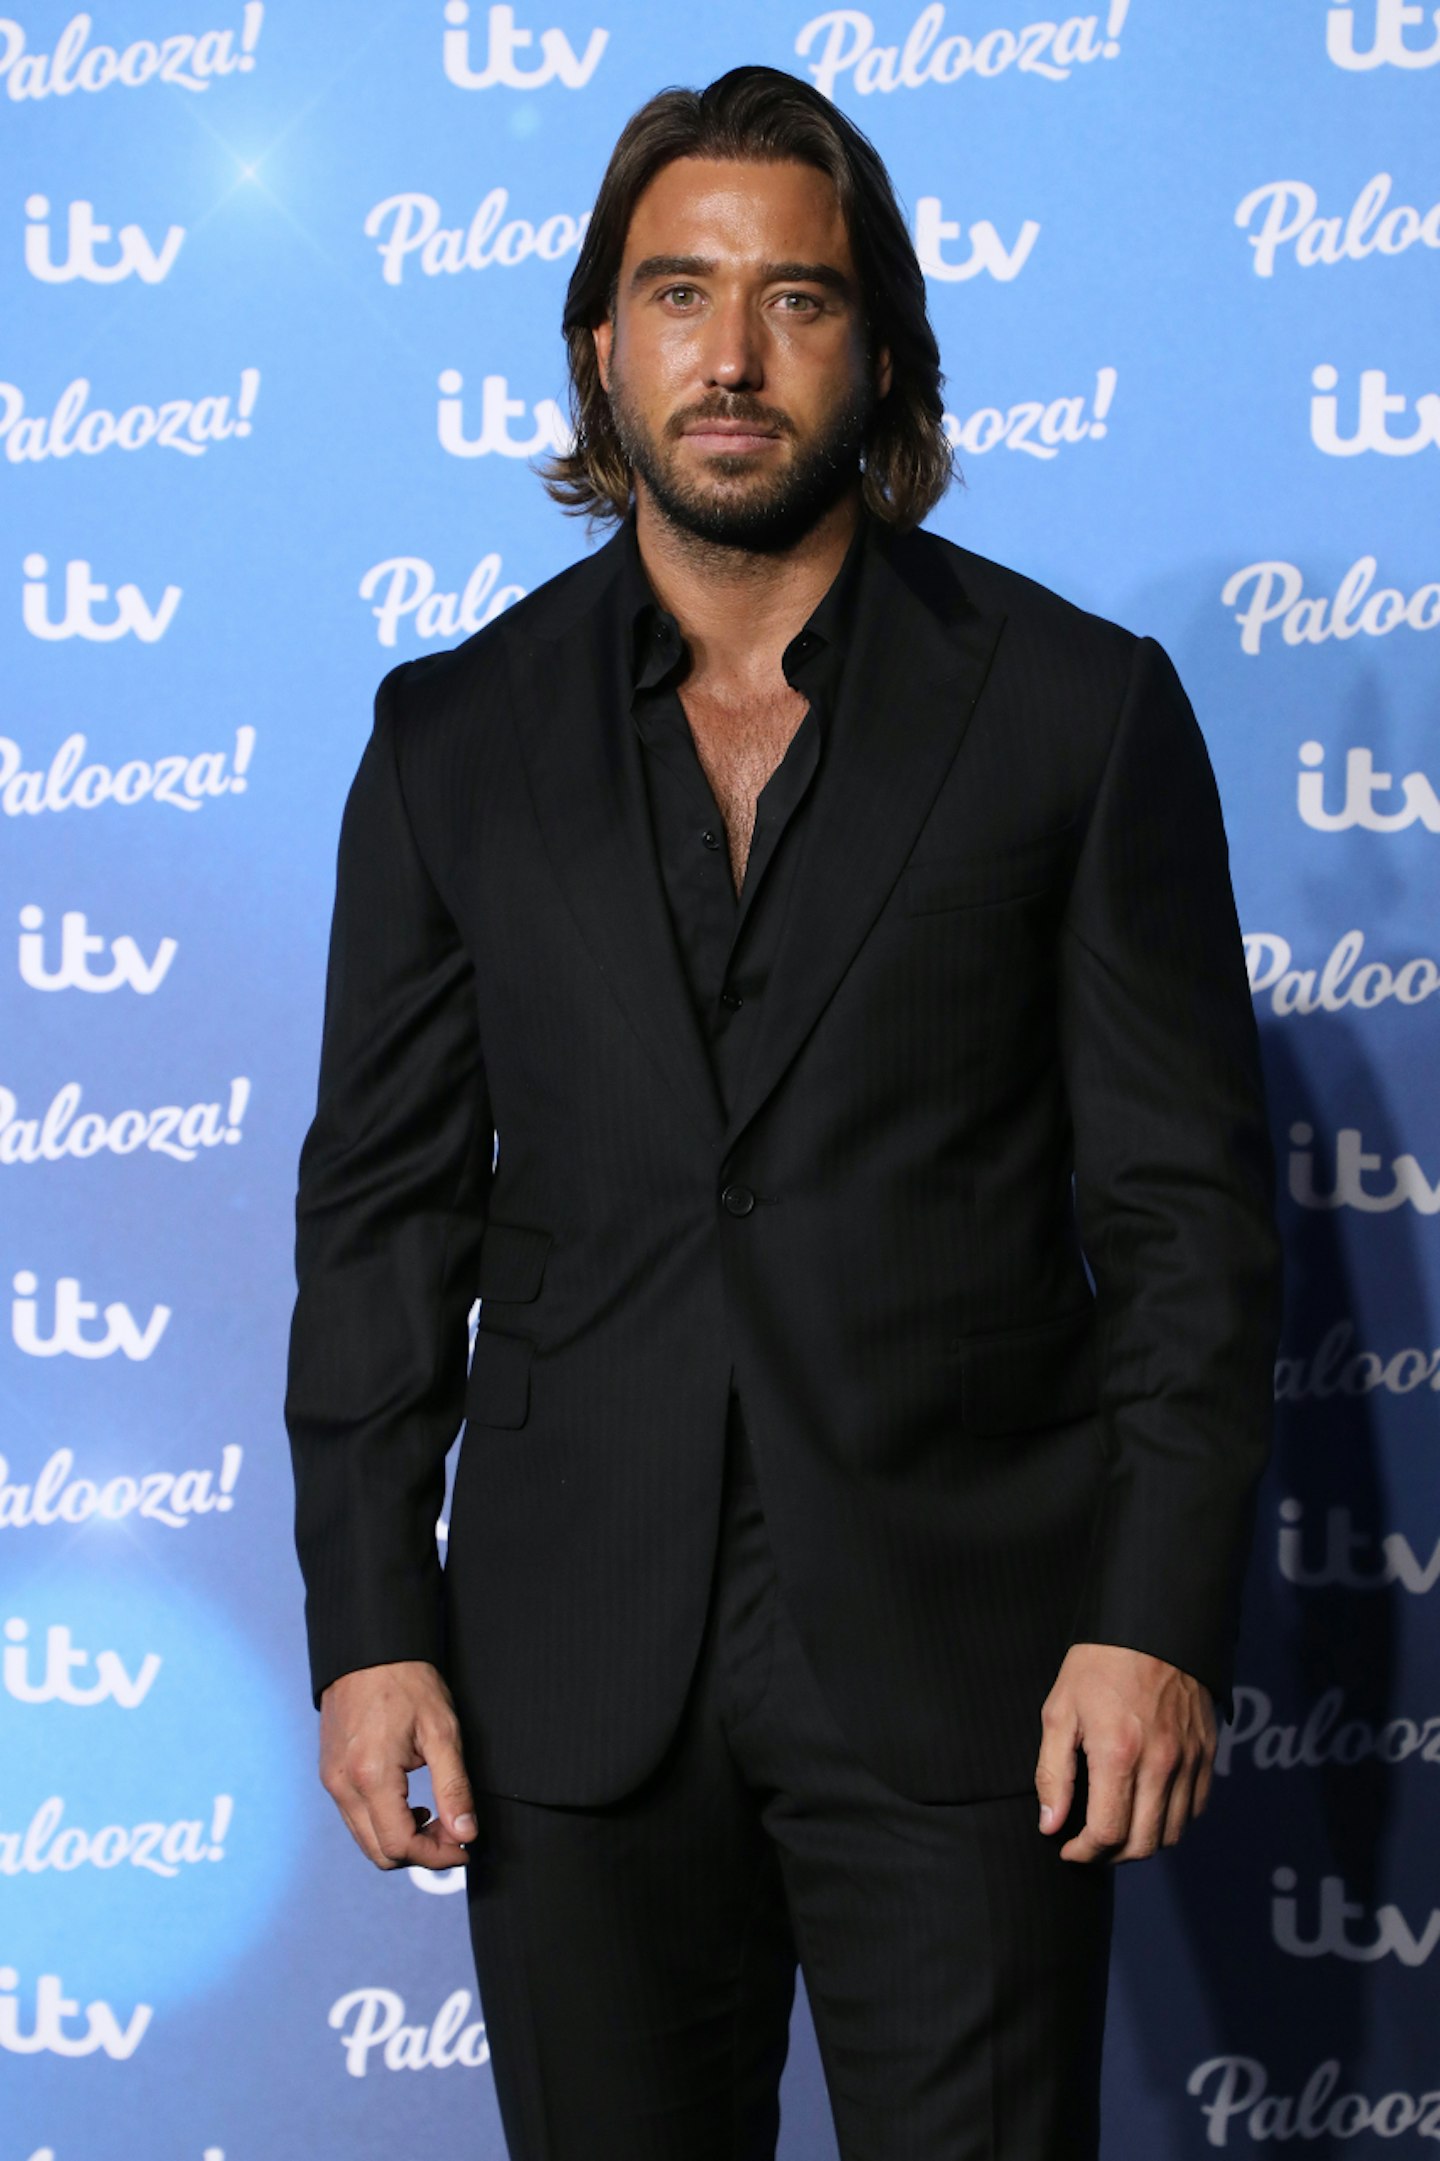 TOWIE's James Lock on the red carpet at the ITV Palooza